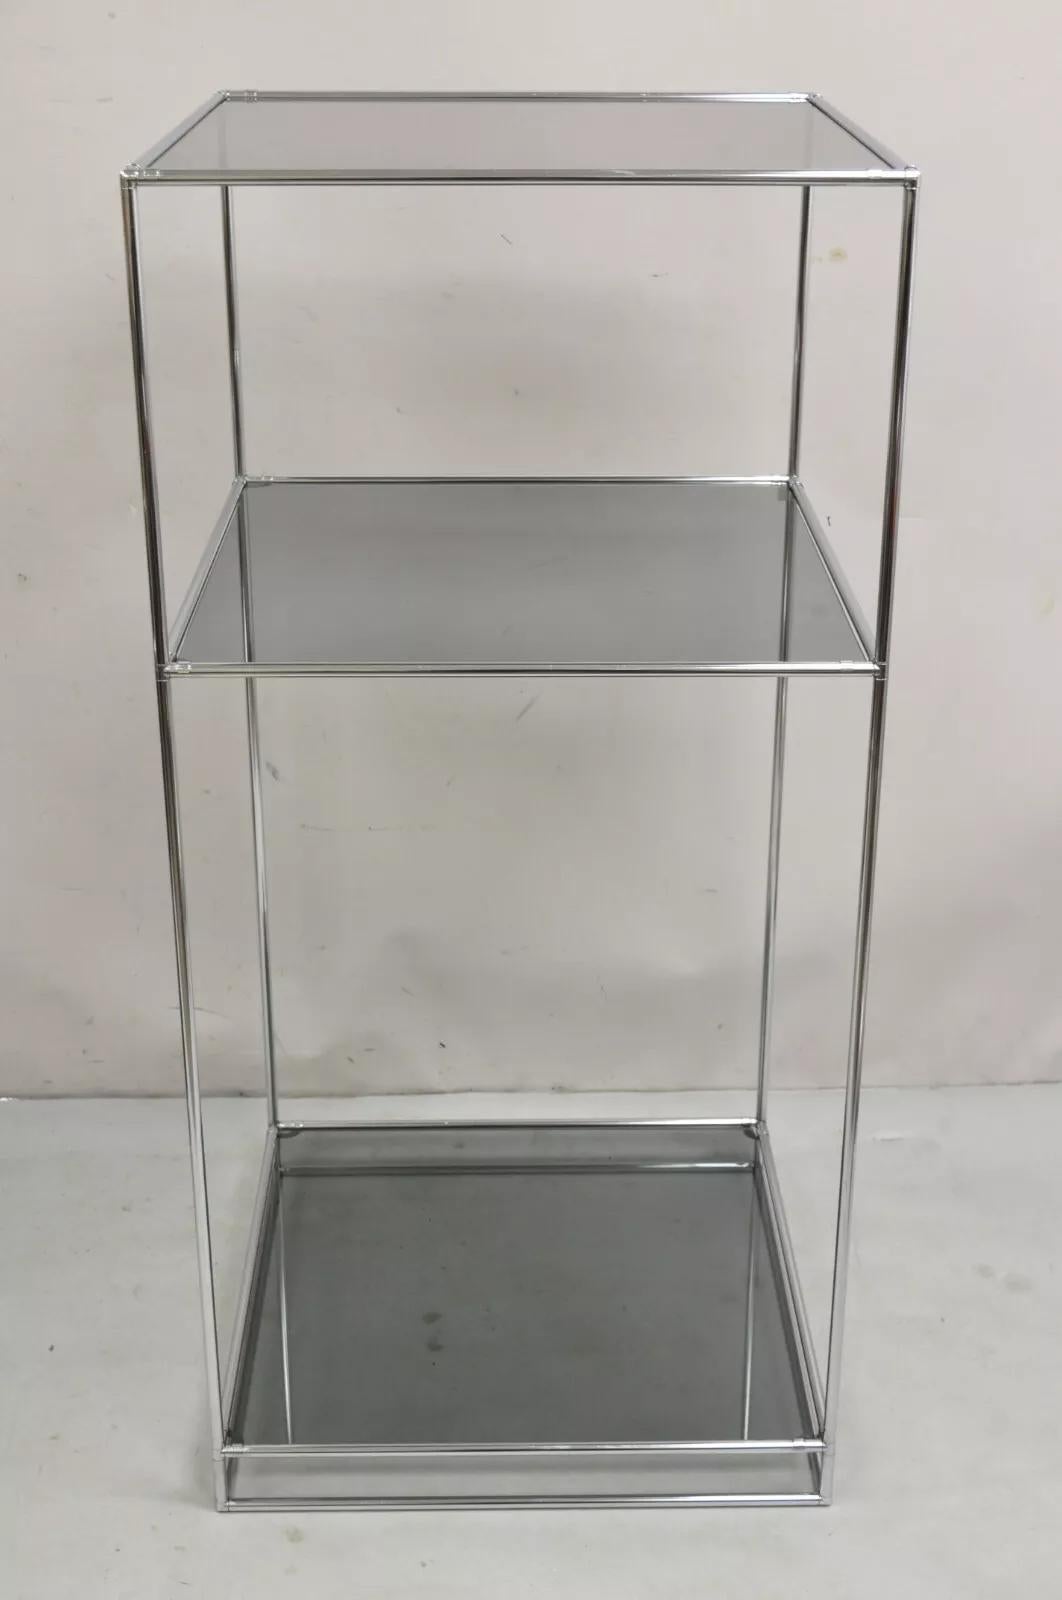 Mid-Century Modern Abstracta Modular Shelf by Poul Cadovius for Royal System Smoked Glass - 2 Pcs For Sale